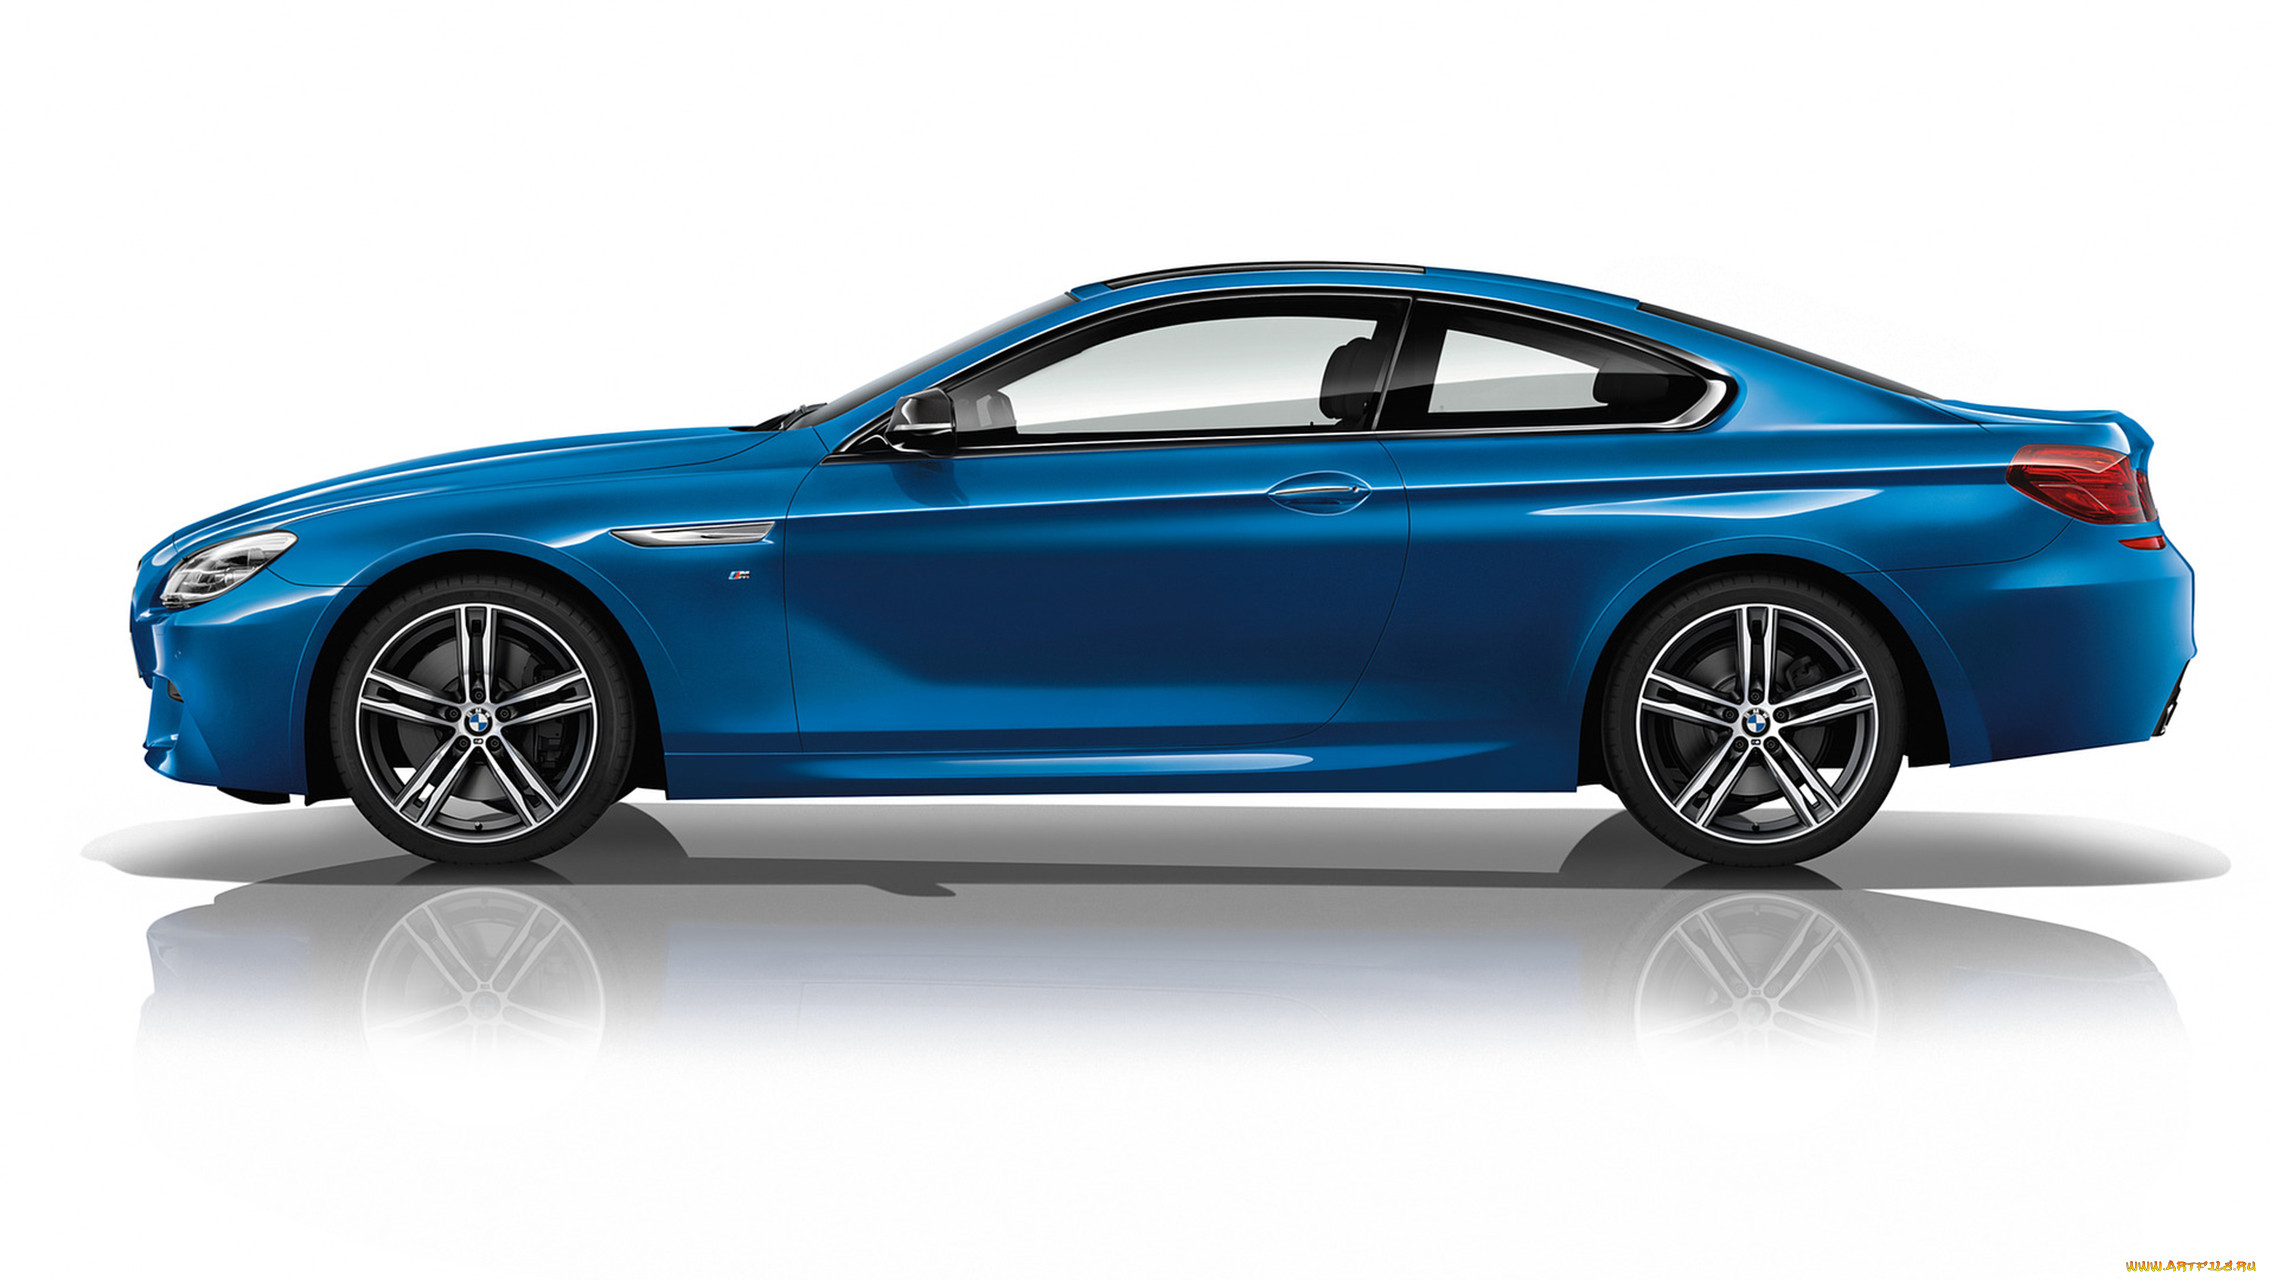 bmw 6 series coupe m sport limited edition 2018, , bmw, series, 6, edition, limited, sport, m, coupe, 2018